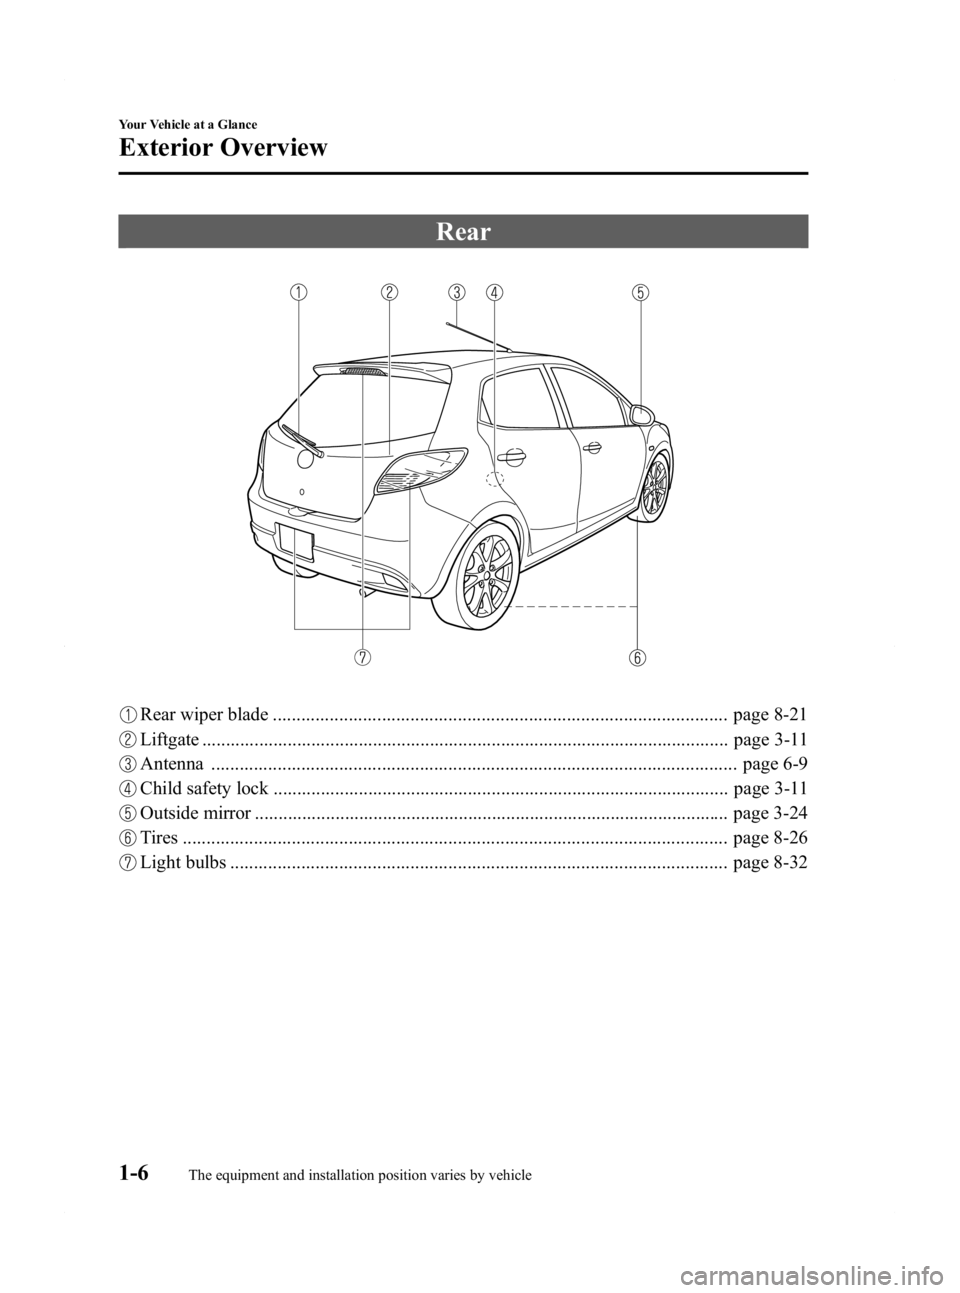 MAZDA MODEL 2 2011  Owners Manual Black plate (12,1)
Rear
Rear wiper blade ................................................................................................ page 8-21
Liftgate ...........................................